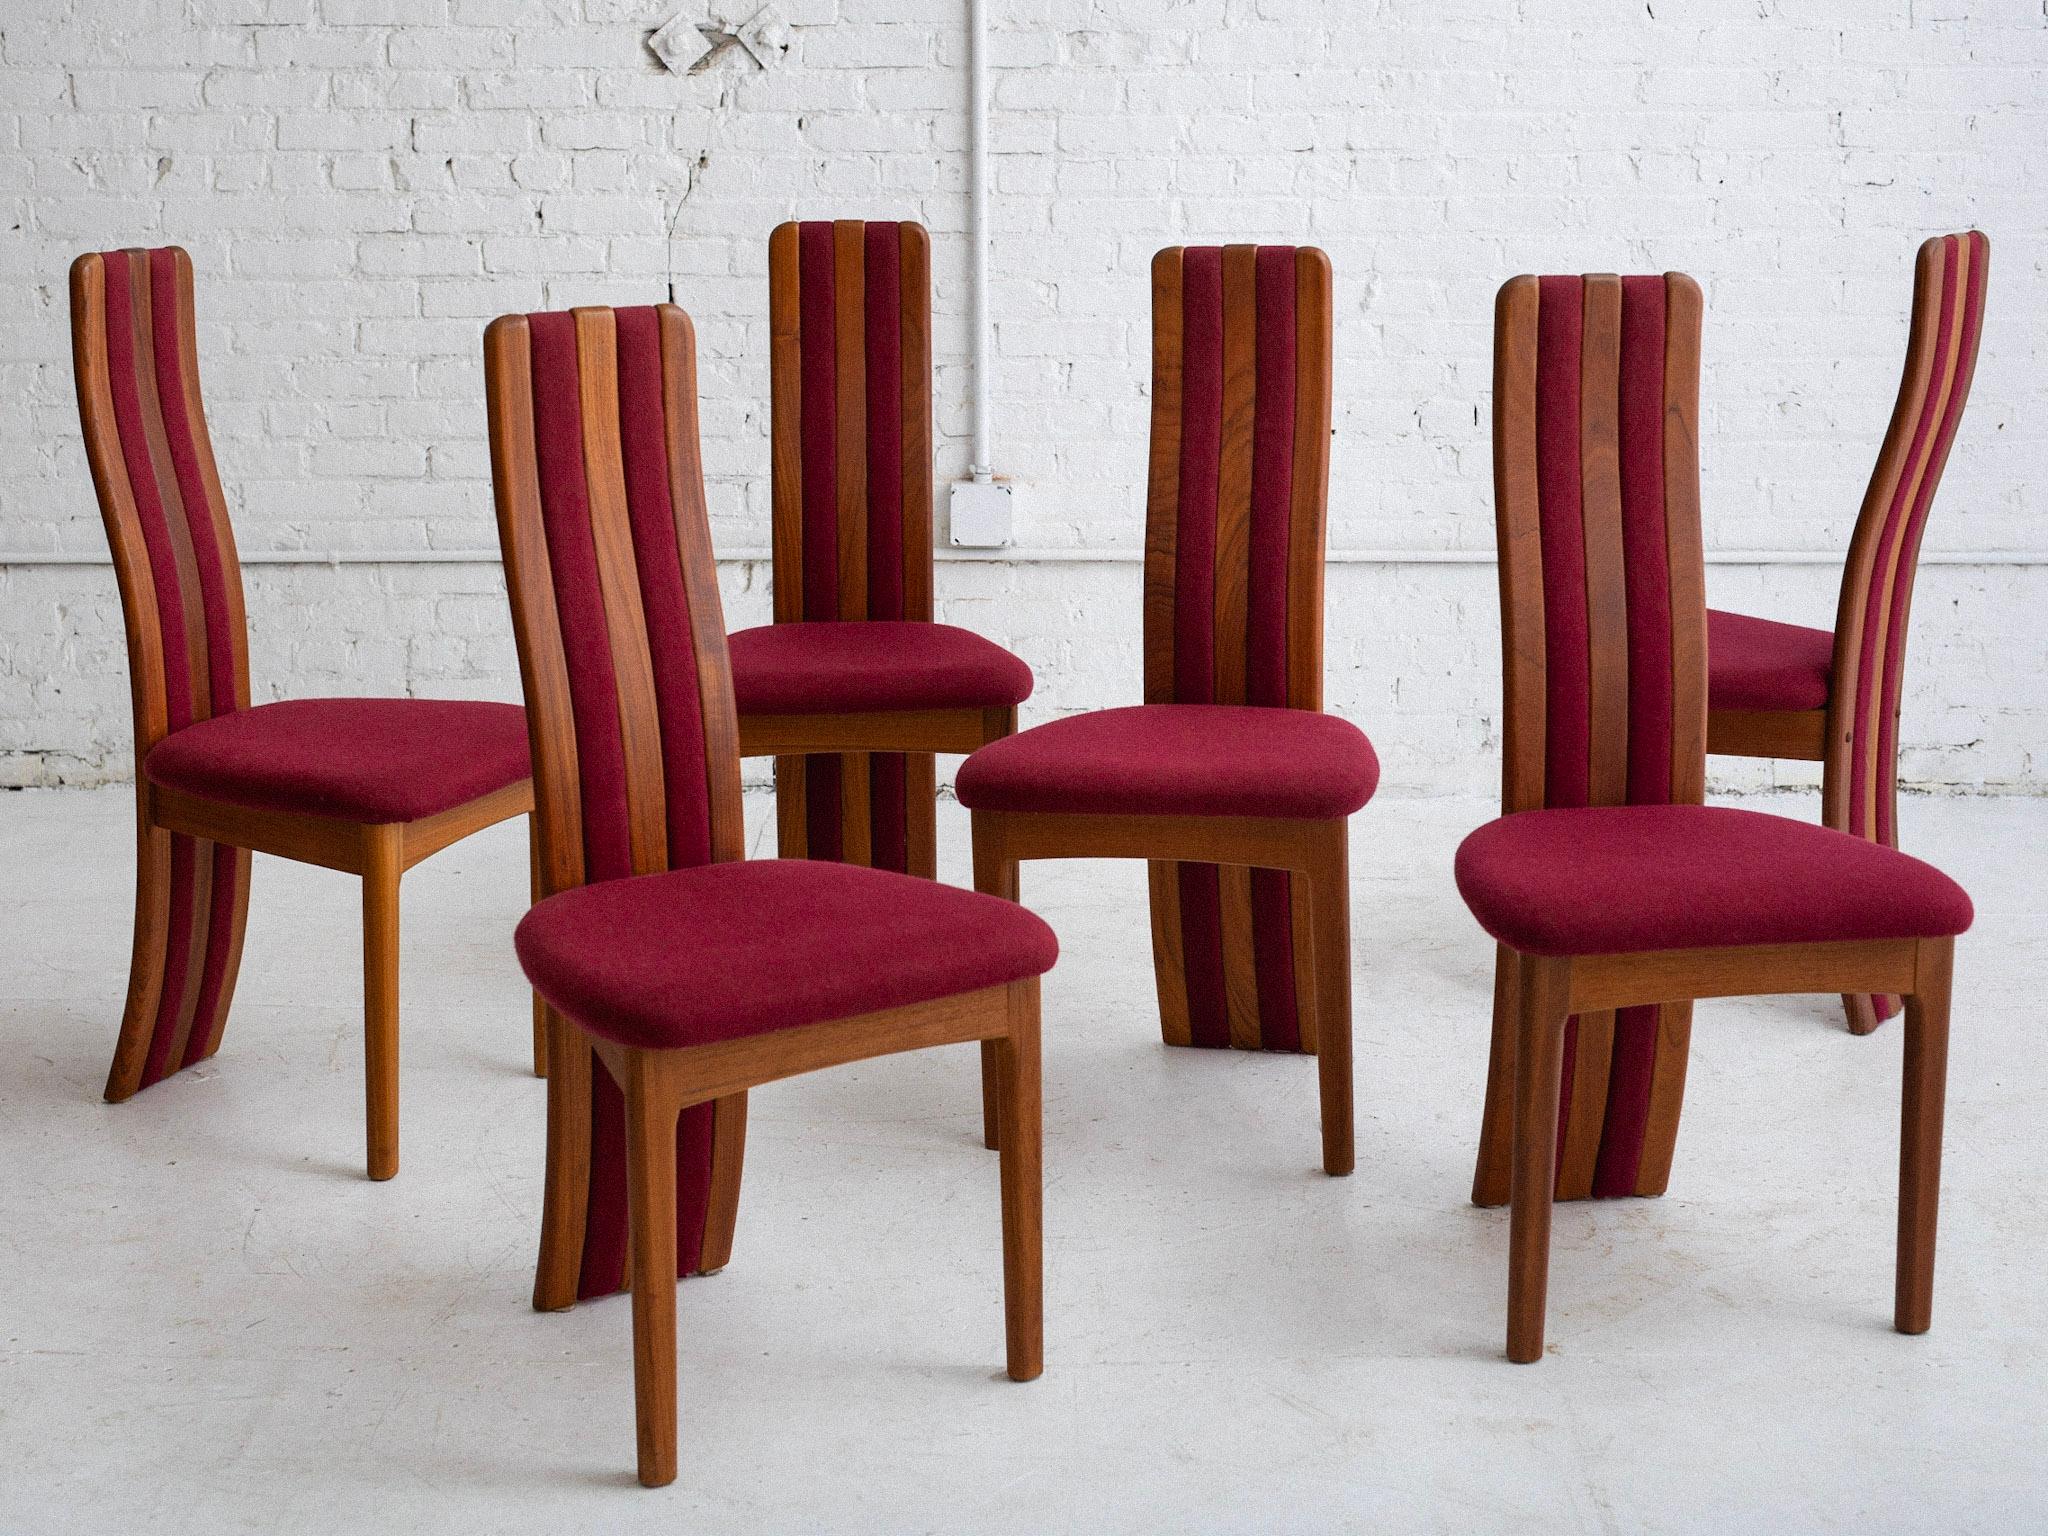 A set of 6 dining chairs by Benny Linden. Sculpted high back silhouette. Teak backs with upholstered channels create a stripe effect. Original burgundy wool fabric.